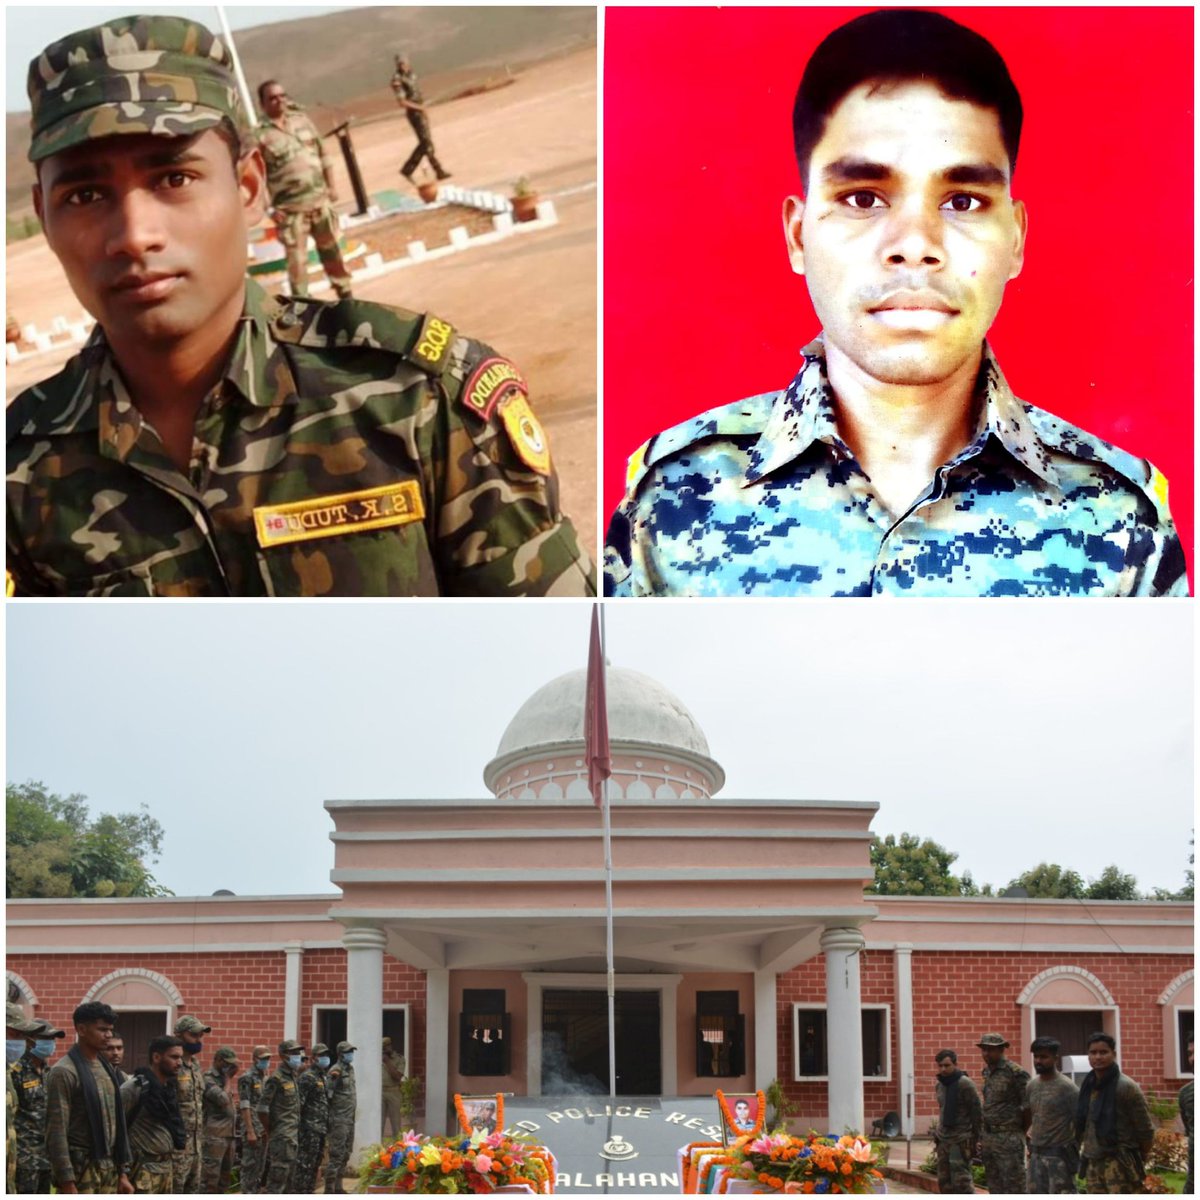 What a sad news for us in @odisha_police !!!

Lost 2 elite SOG commandos- Debashish Sethy & Sudhir Kumar Tudu, in battle againt left wing extremists yesterday. In a fierce encounter on Kalahandi-Kandhamal border 5 maoists were also killed.

Salutes to the bravehearts.
Jai Hind 🇮🇳